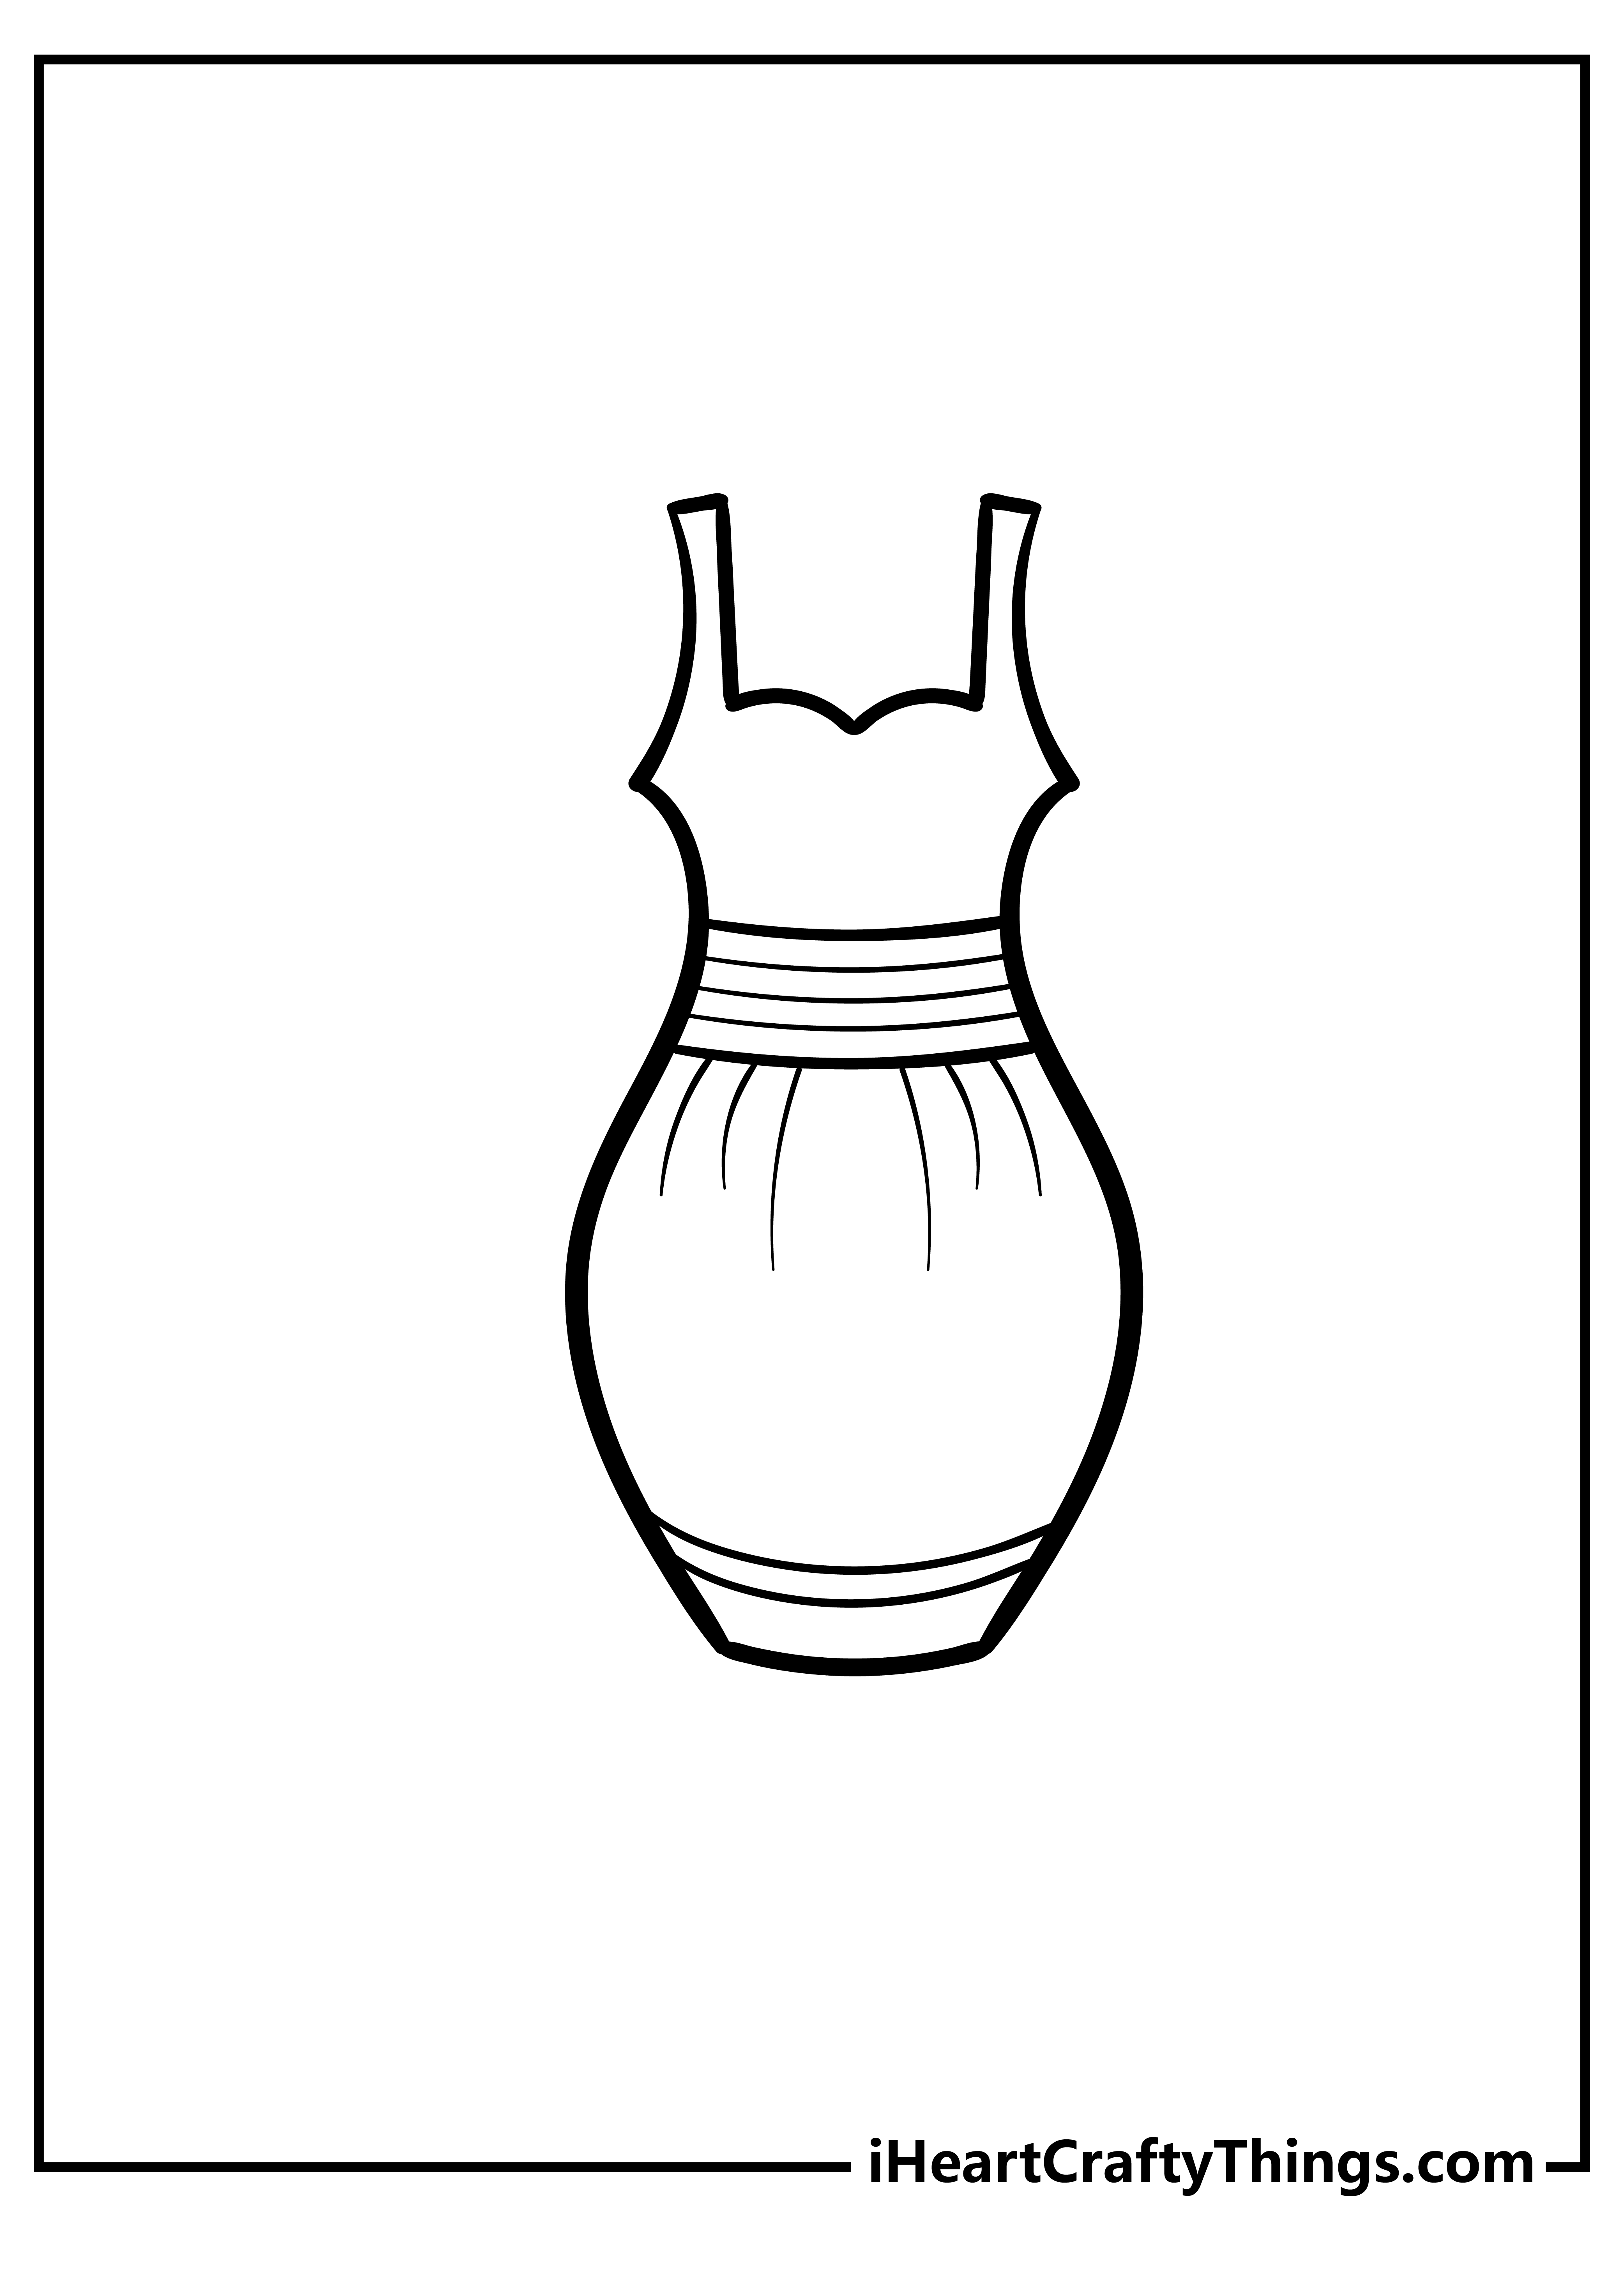 Dress Coloring Sheet for children free download